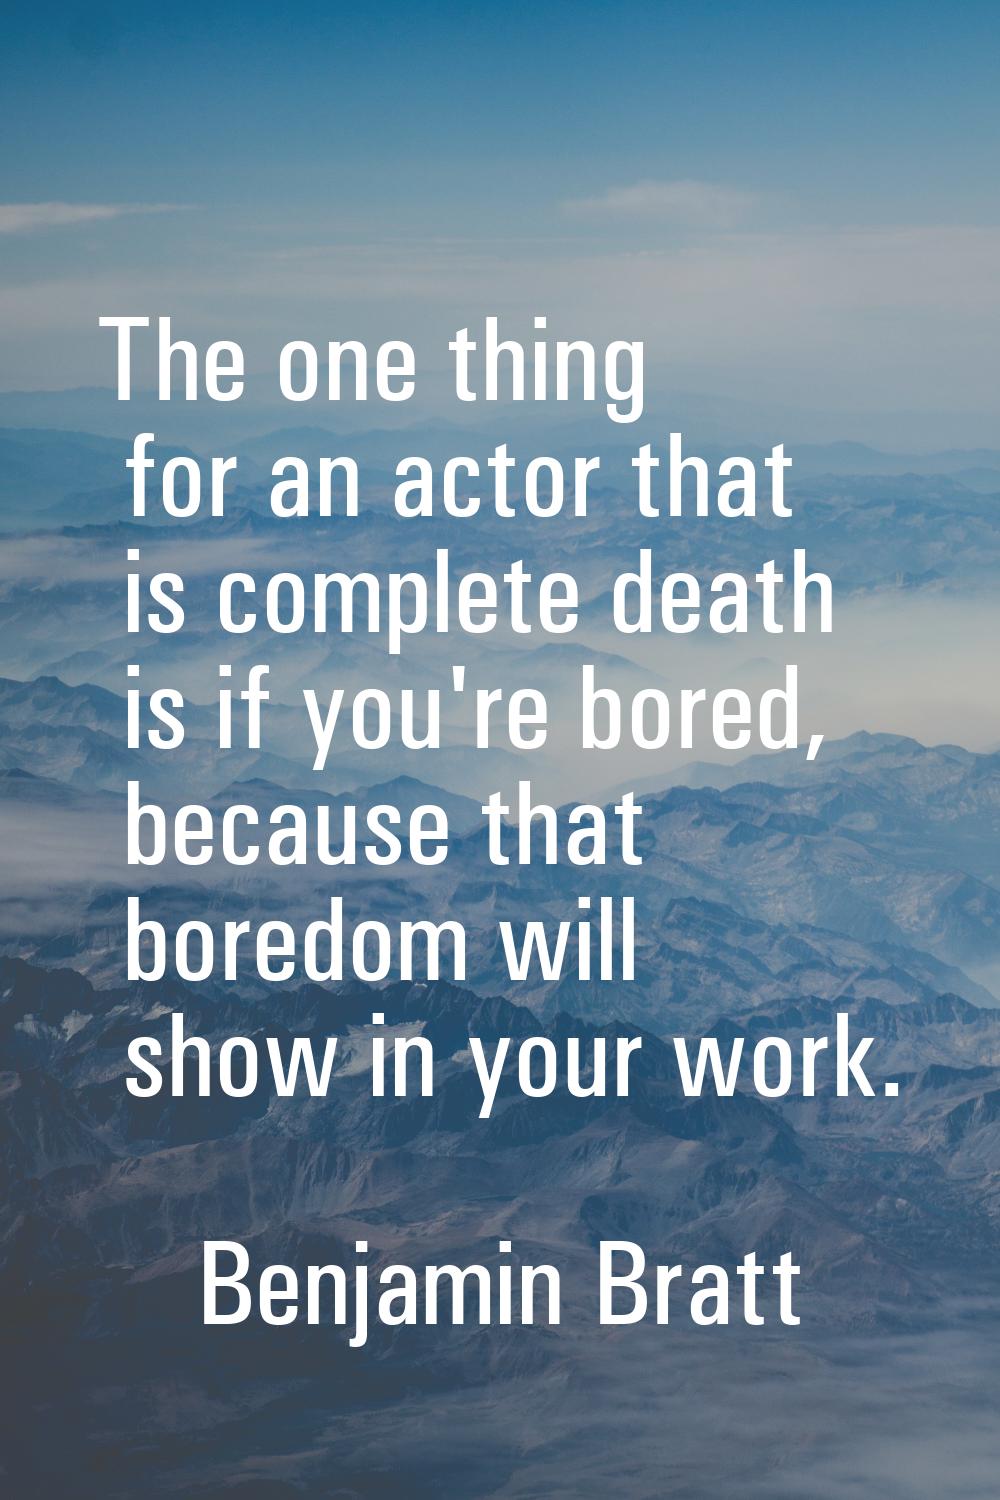 The one thing for an actor that is complete death is if you're bored, because that boredom will sho